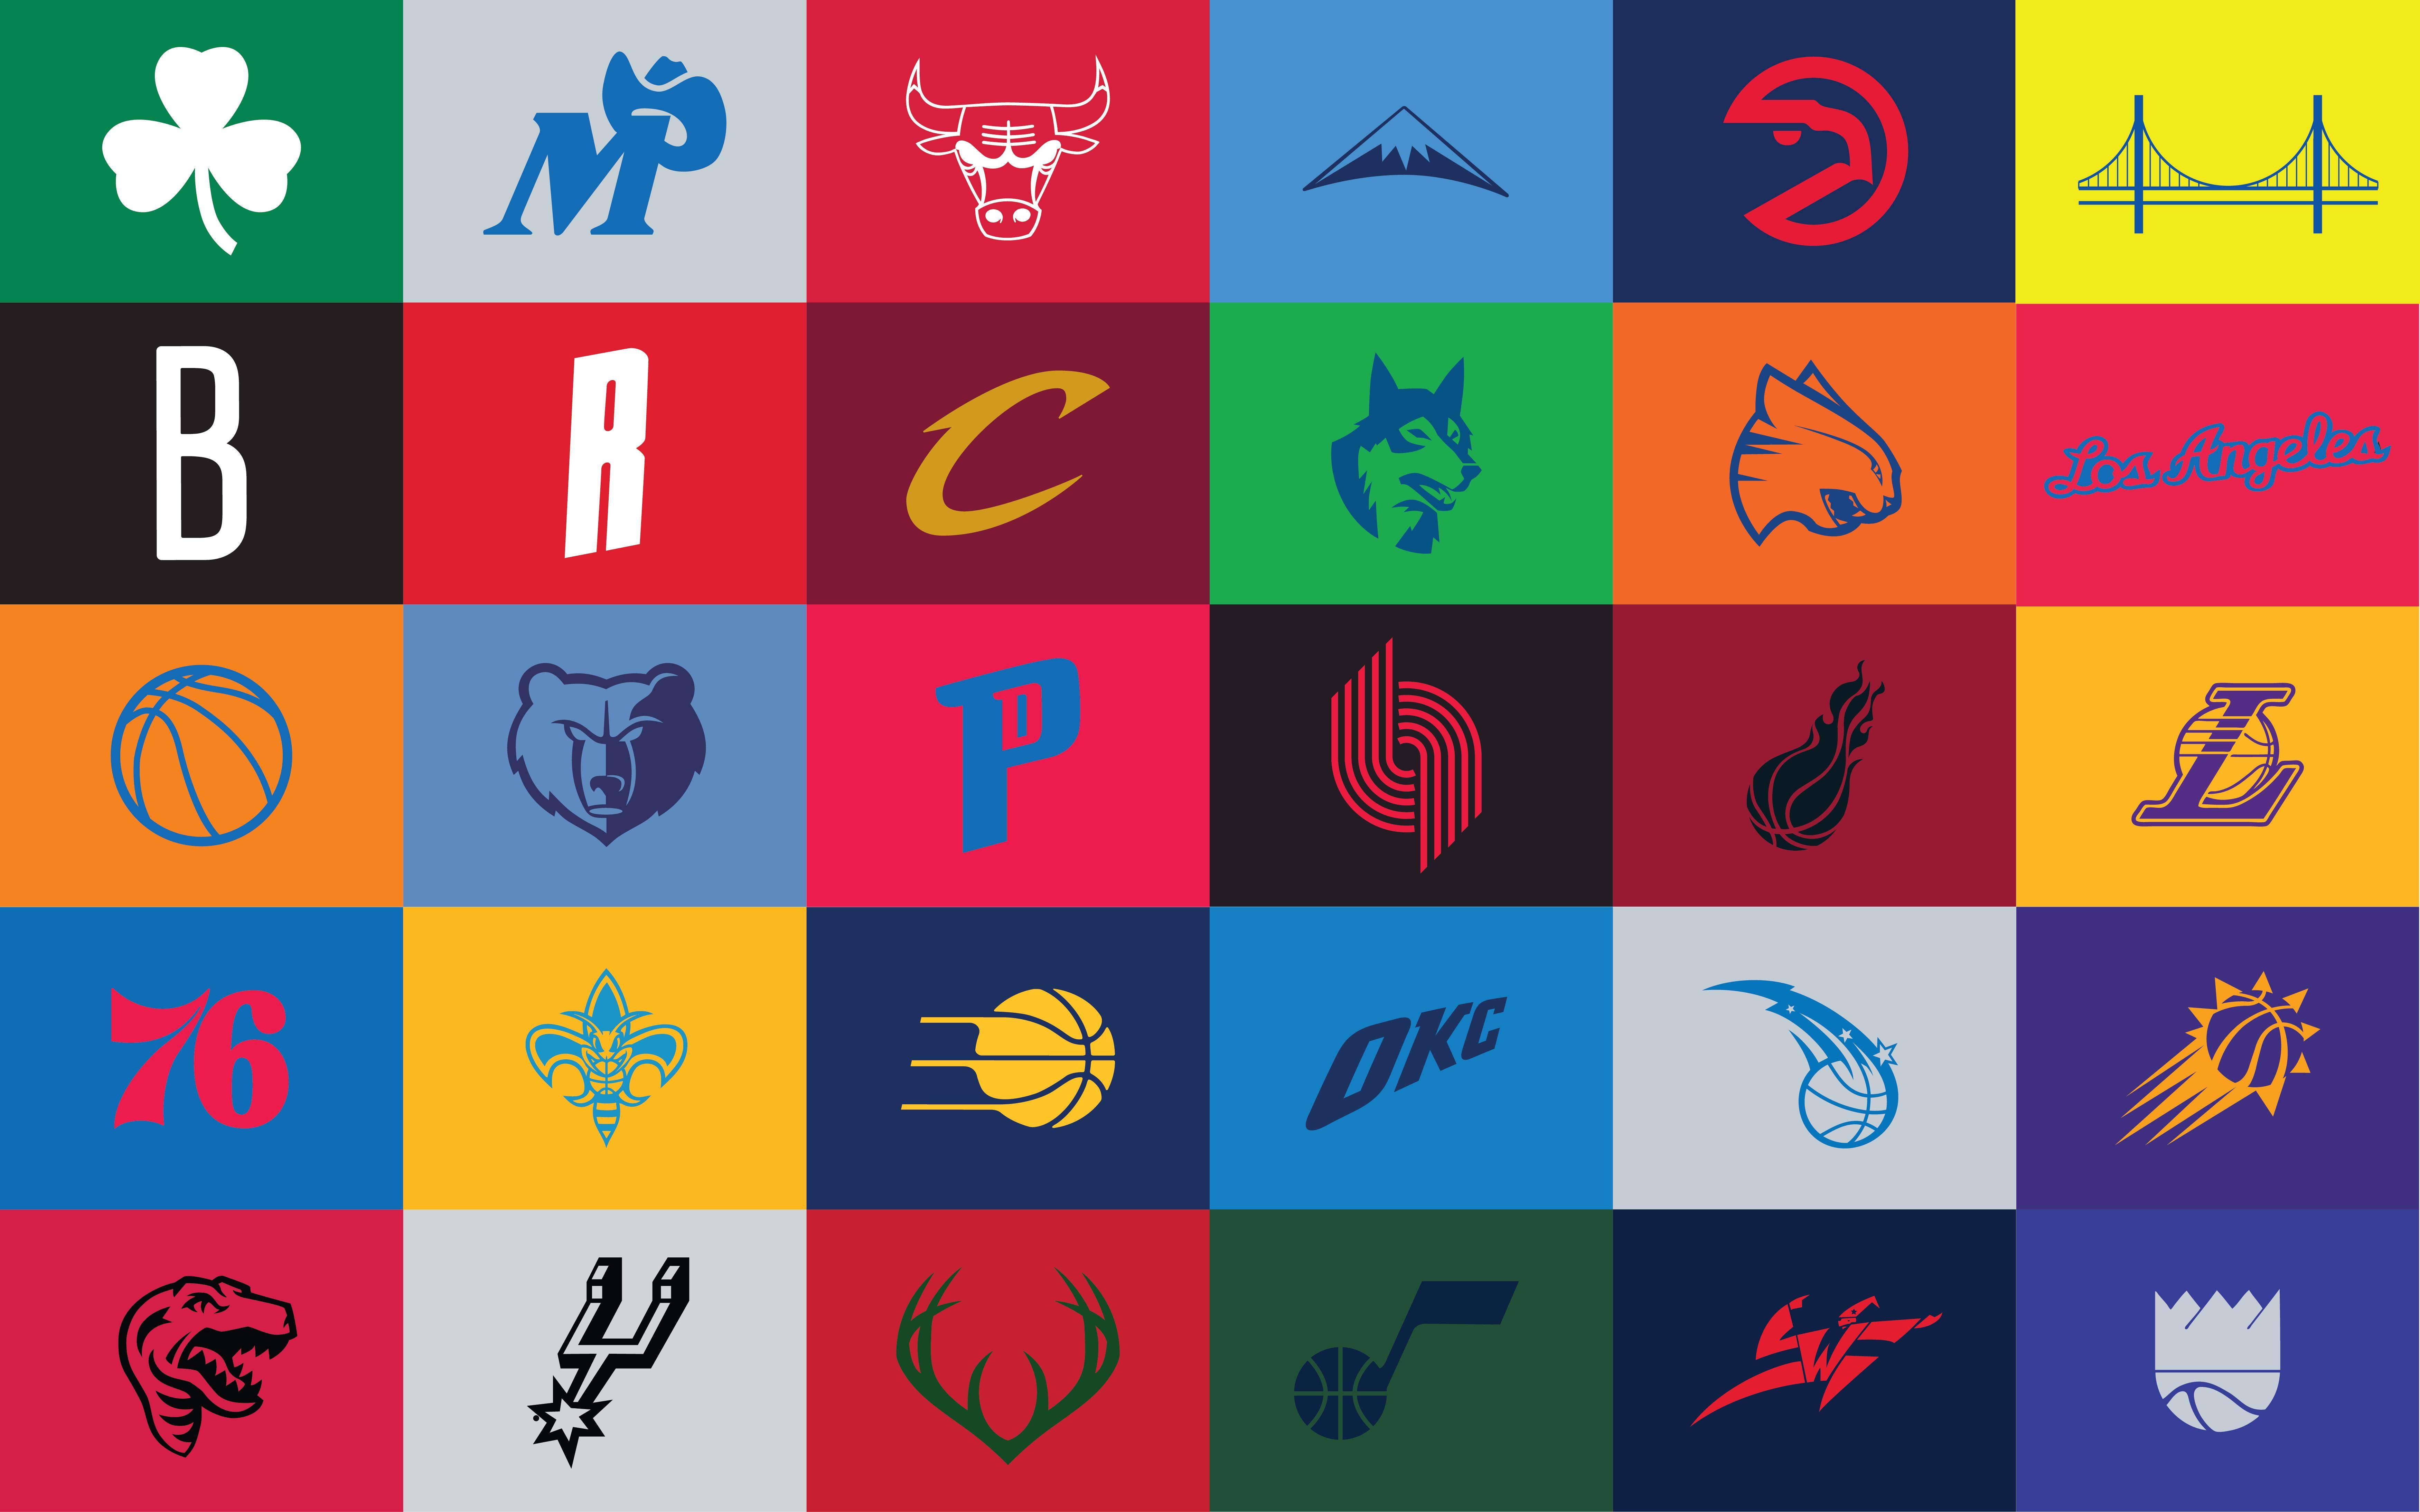 Inspired by the minimalist NHL poster I made one for the NBA : nba